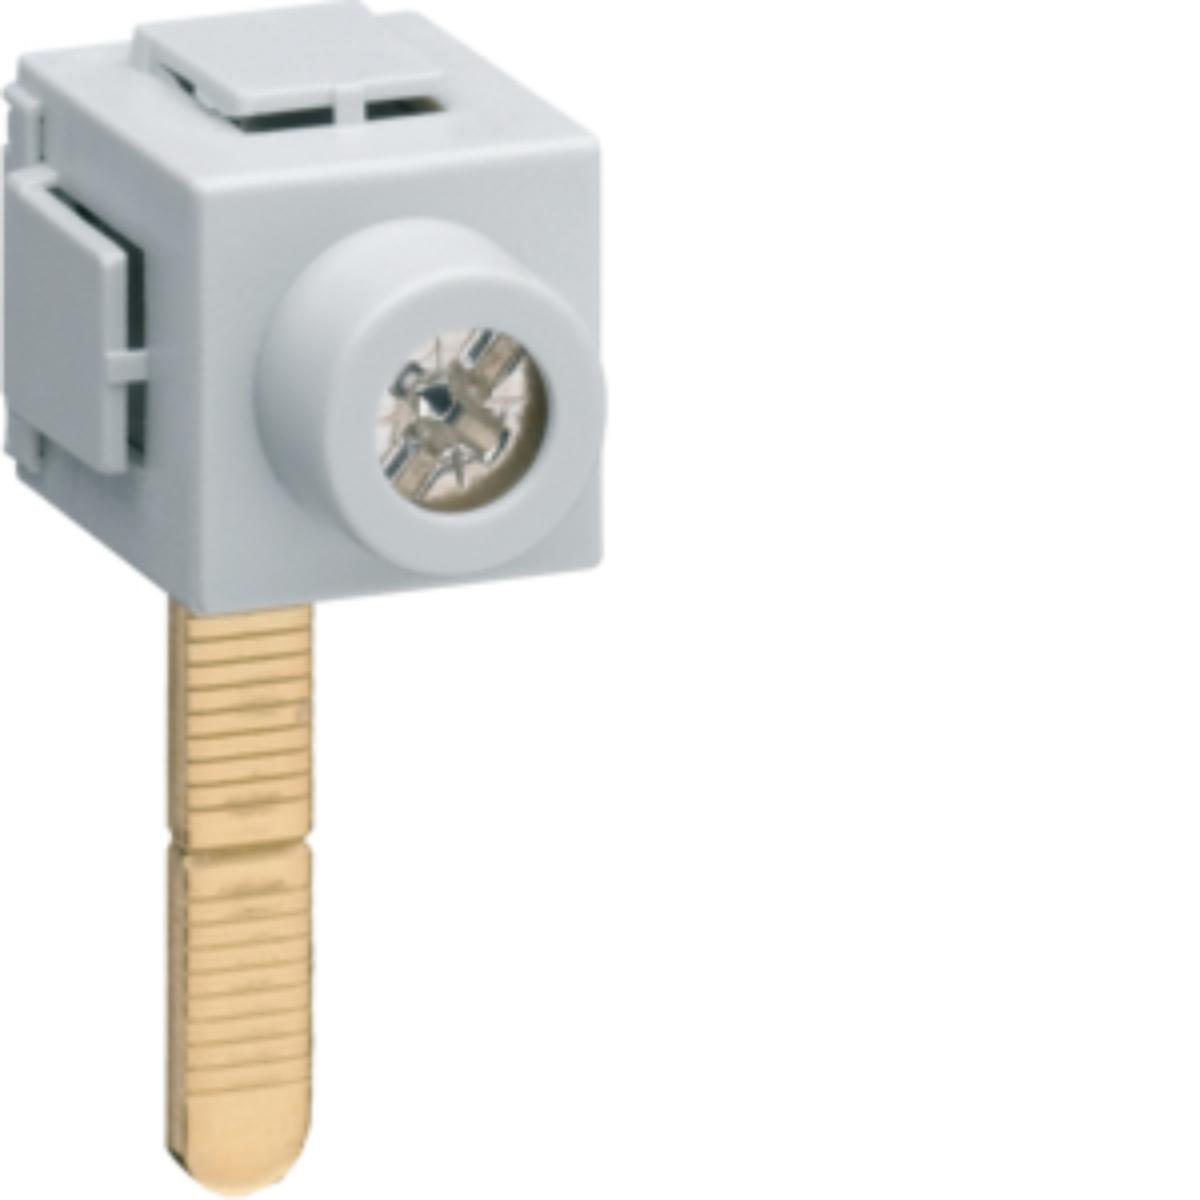 CONNECTOR PRONG 1P 35MM CABLE